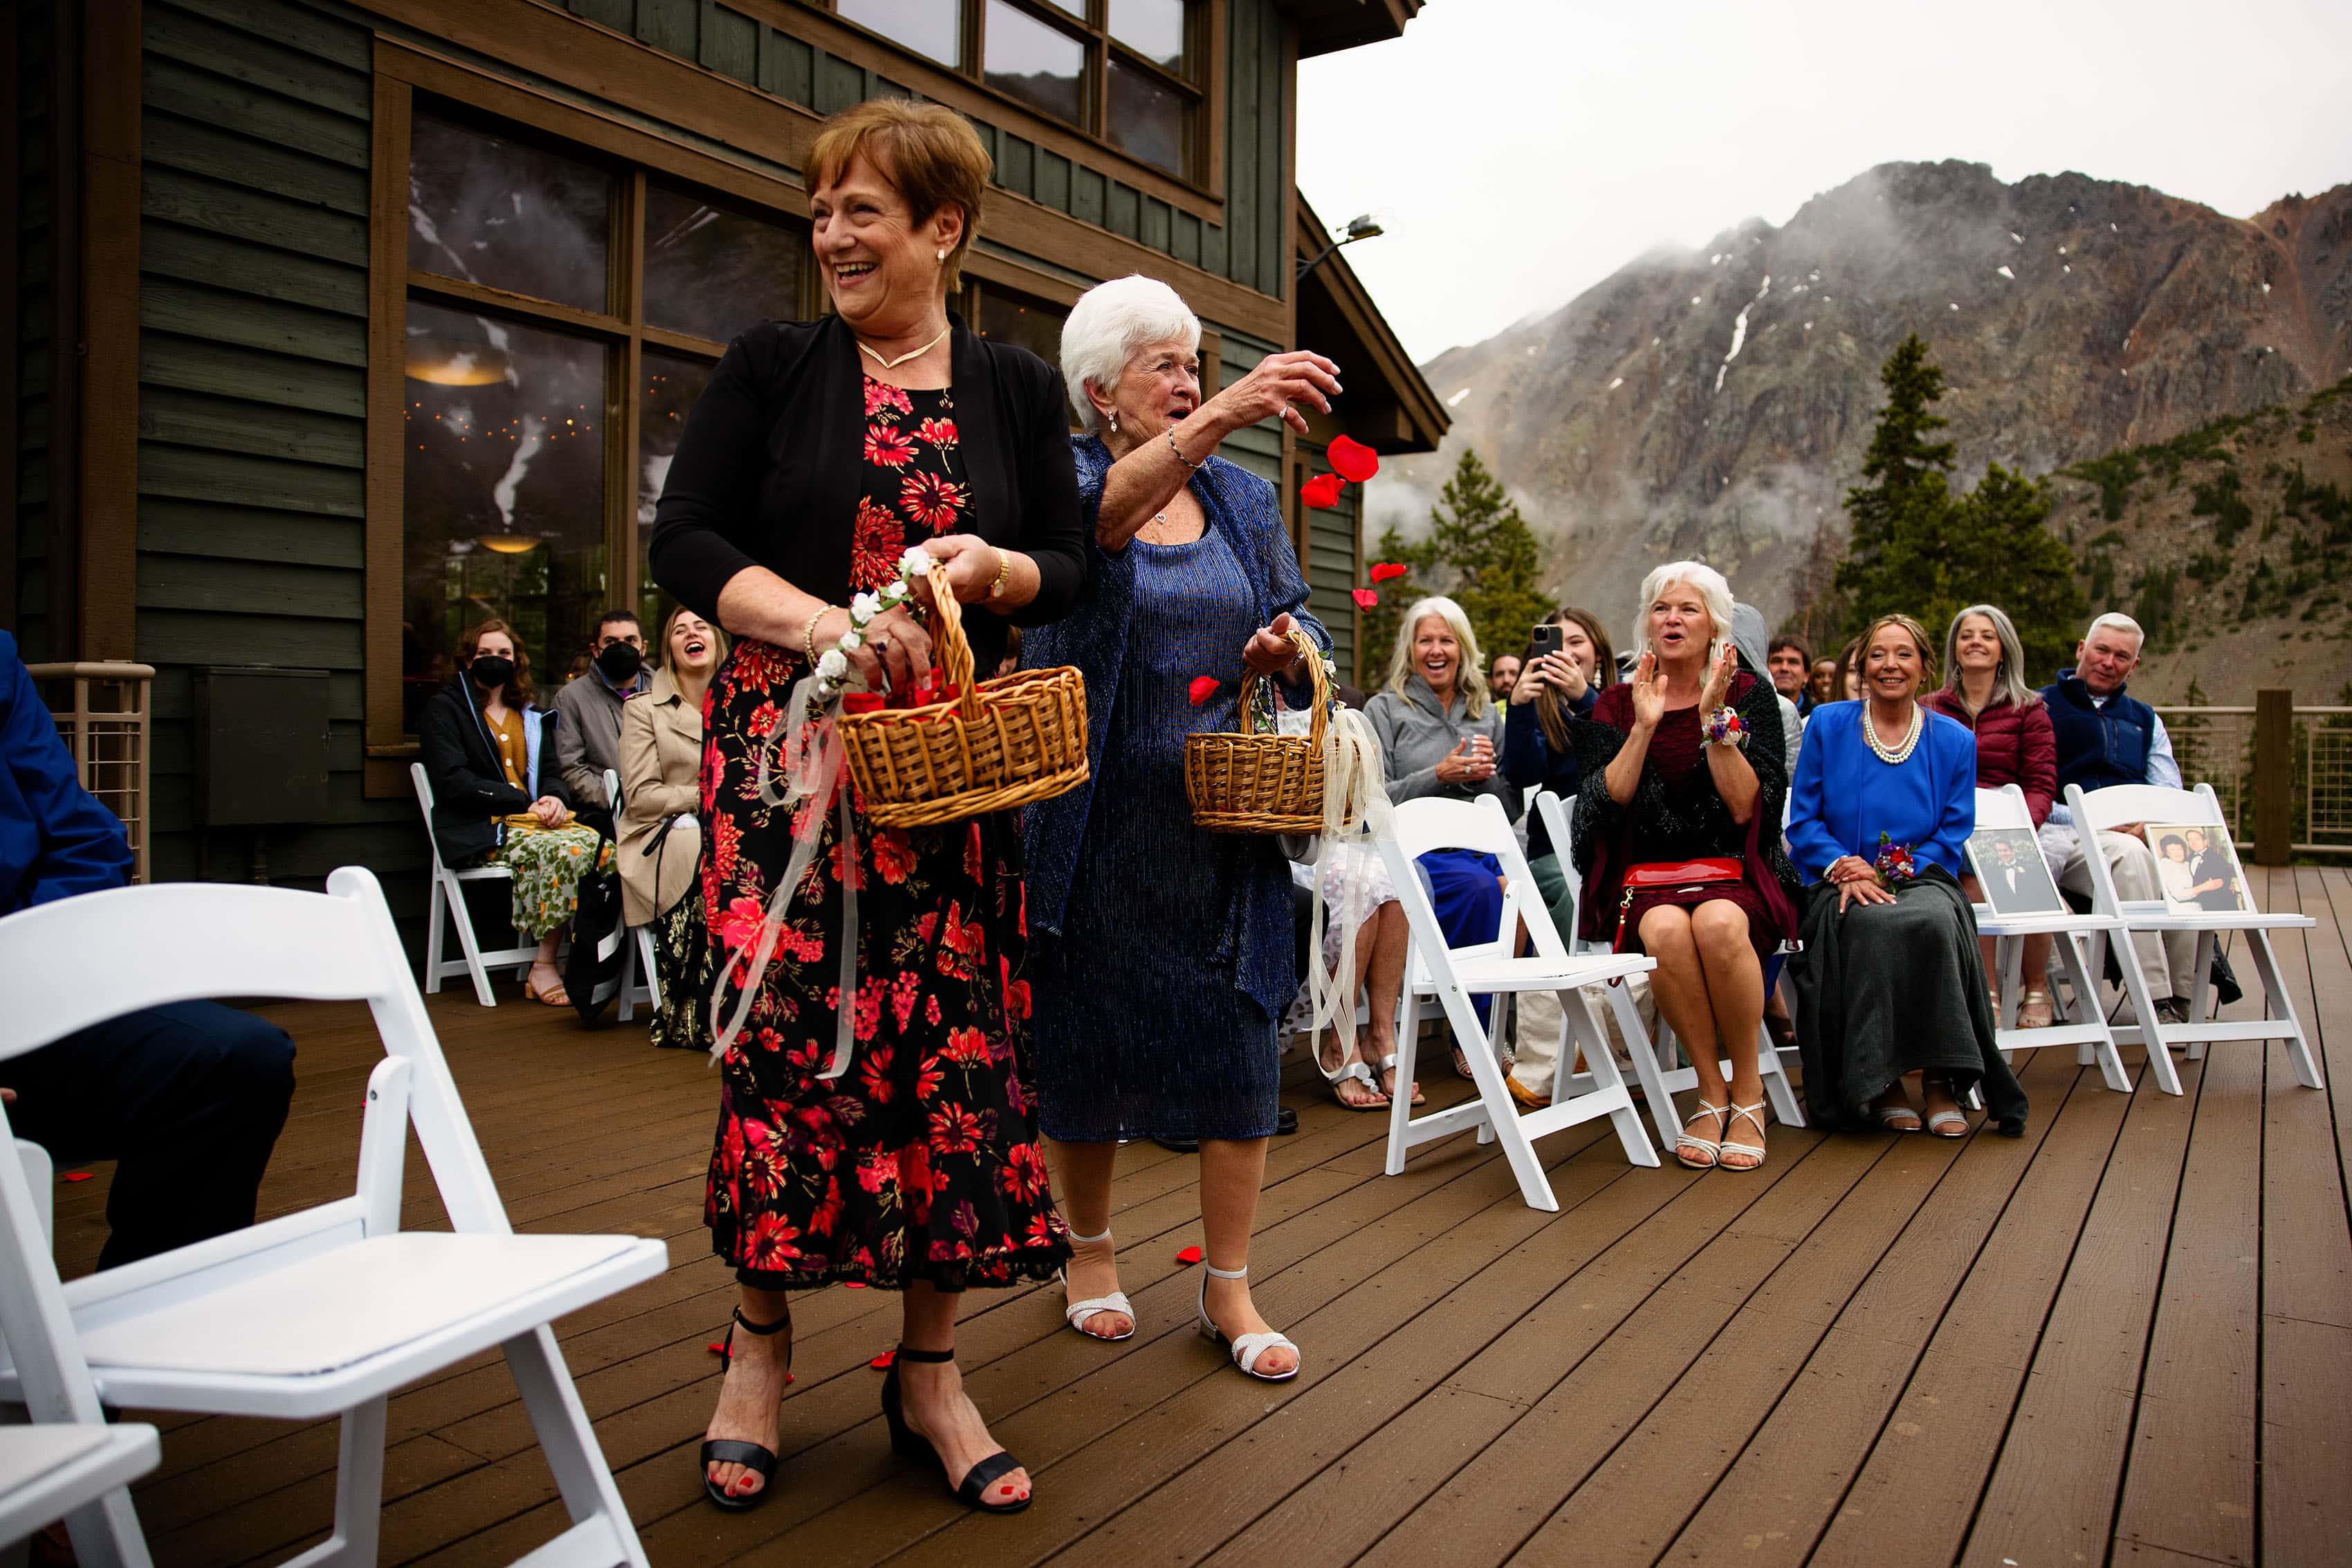 Grandmothers toss rose petals during a wedding ceremony at Arapahoe Basin